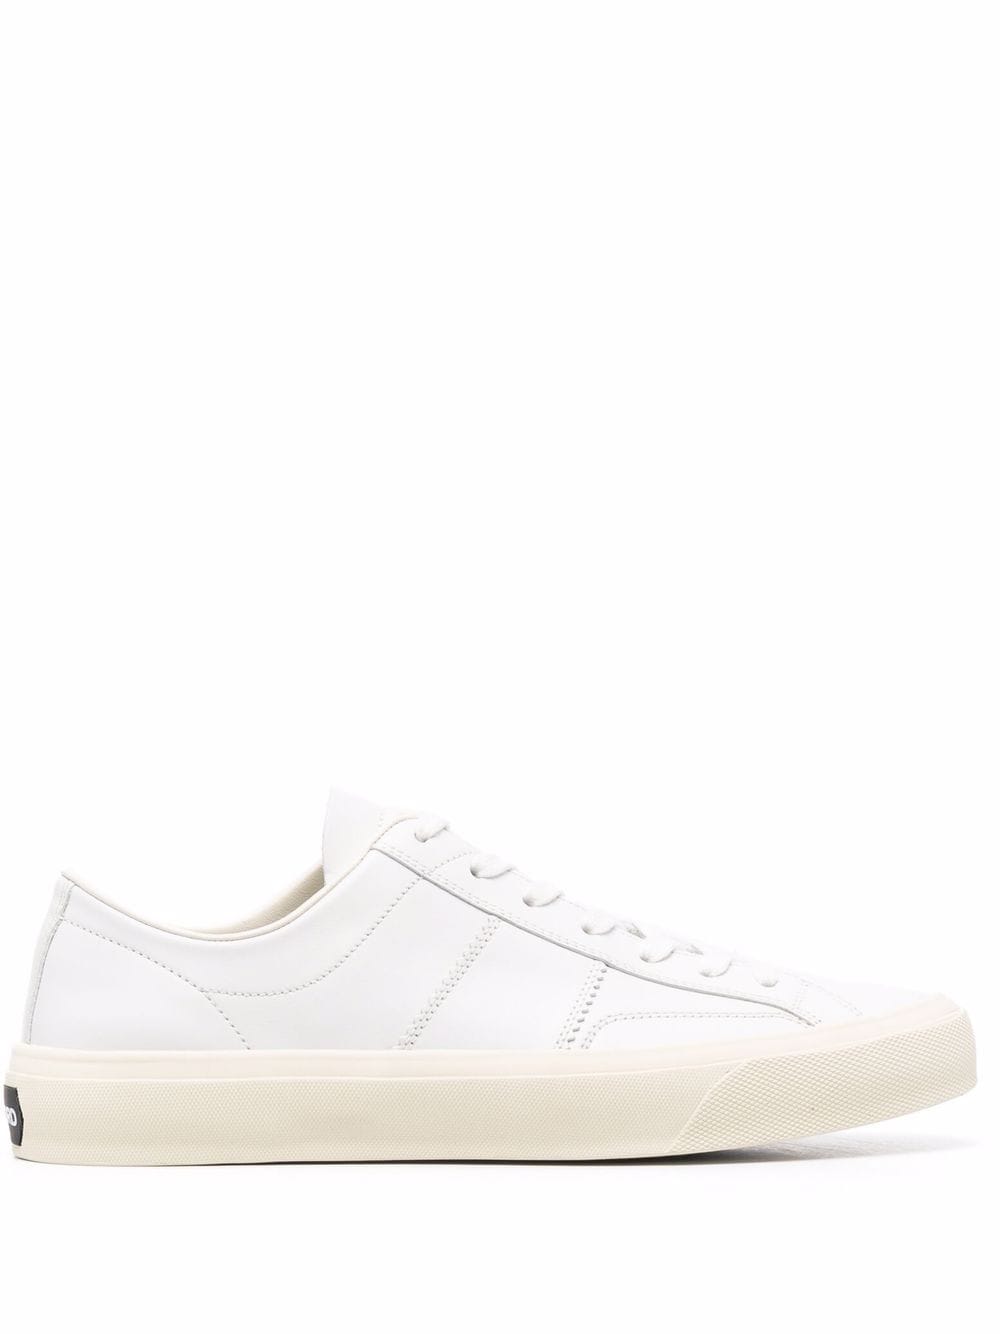 TOM FORD Cambridge Leather Sneakers White